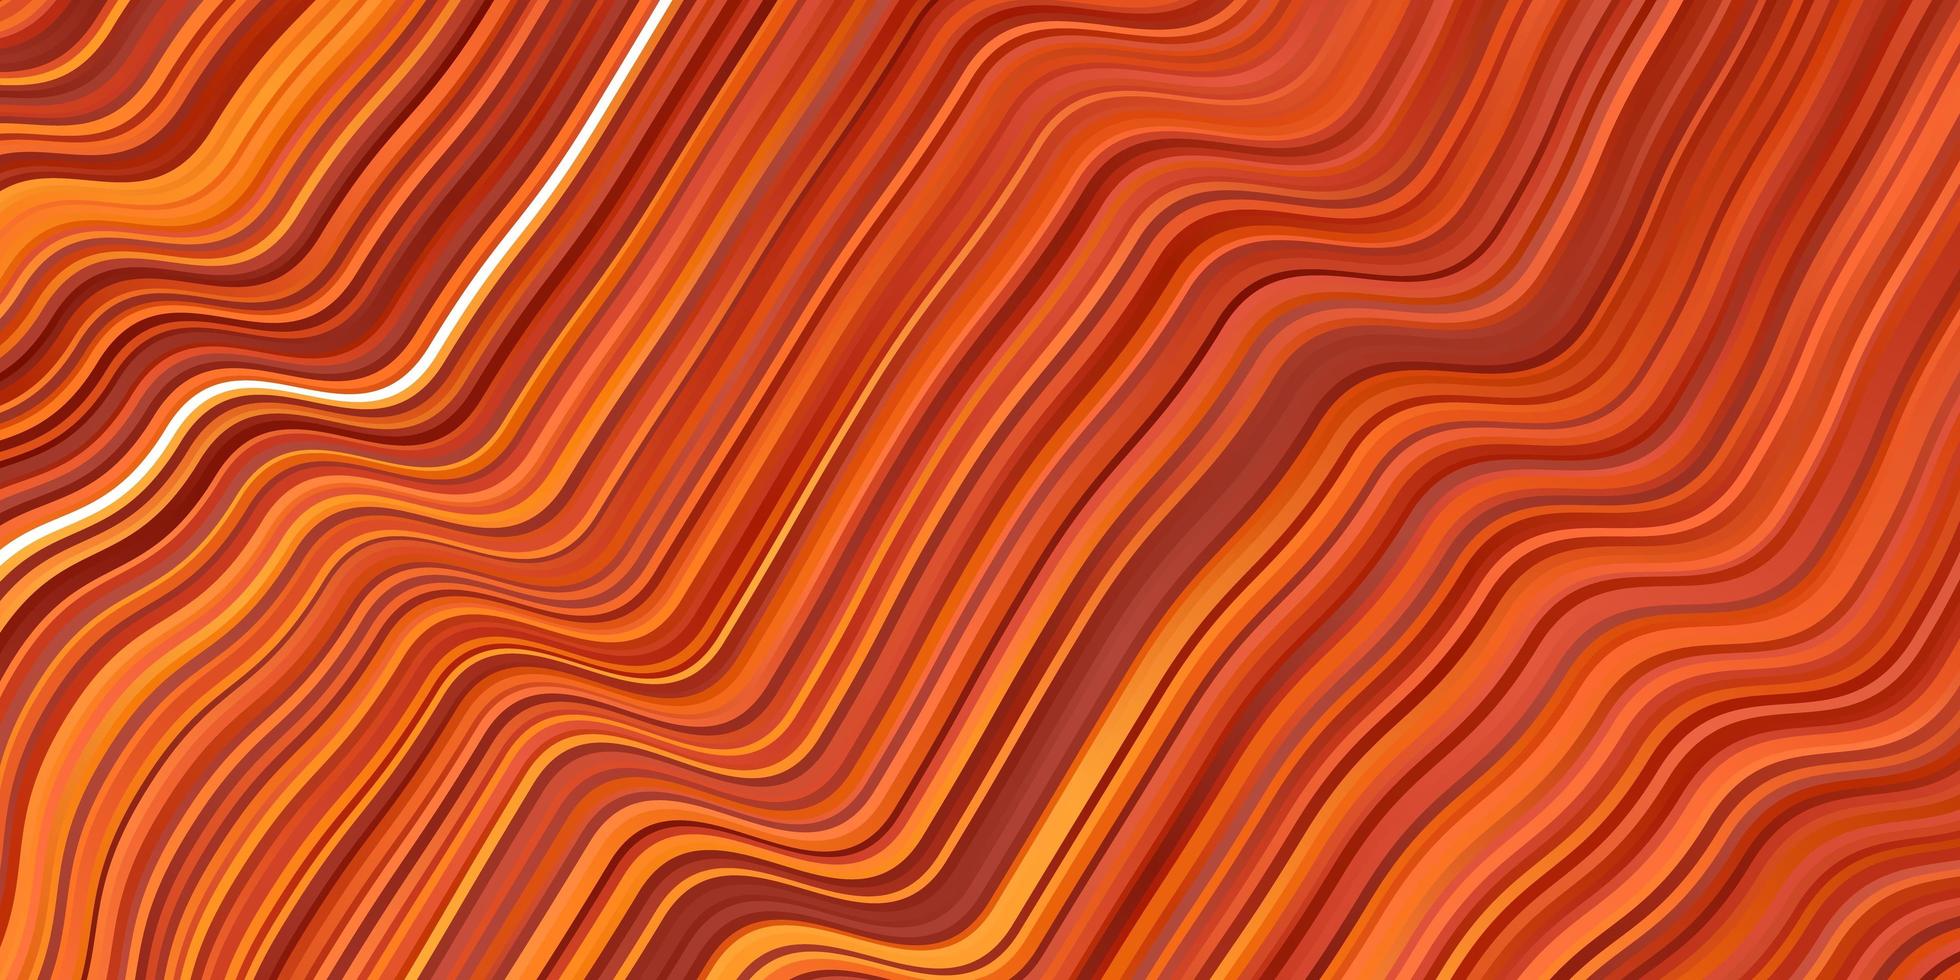 Light Orange vector background with curves. Colorful illustration with curved lines. Pattern for websites, landing pages.